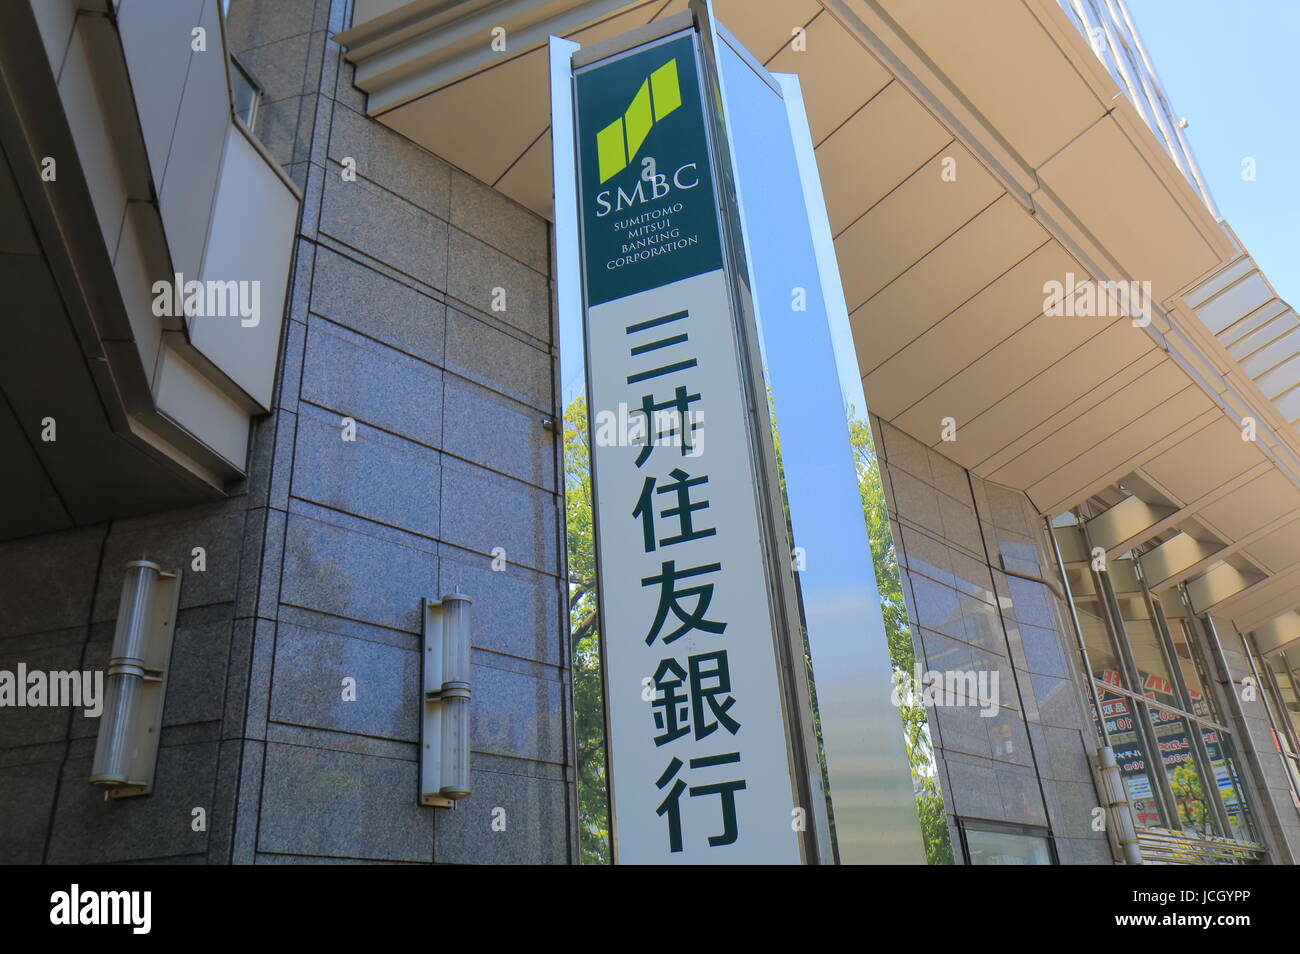 Mitsui Sumitomo Bank. Mitsui Sumitomo Bank is a Japanese bank based in Yurakucho Tokyo and is one of the biggest bank in Japan. Stock Photo